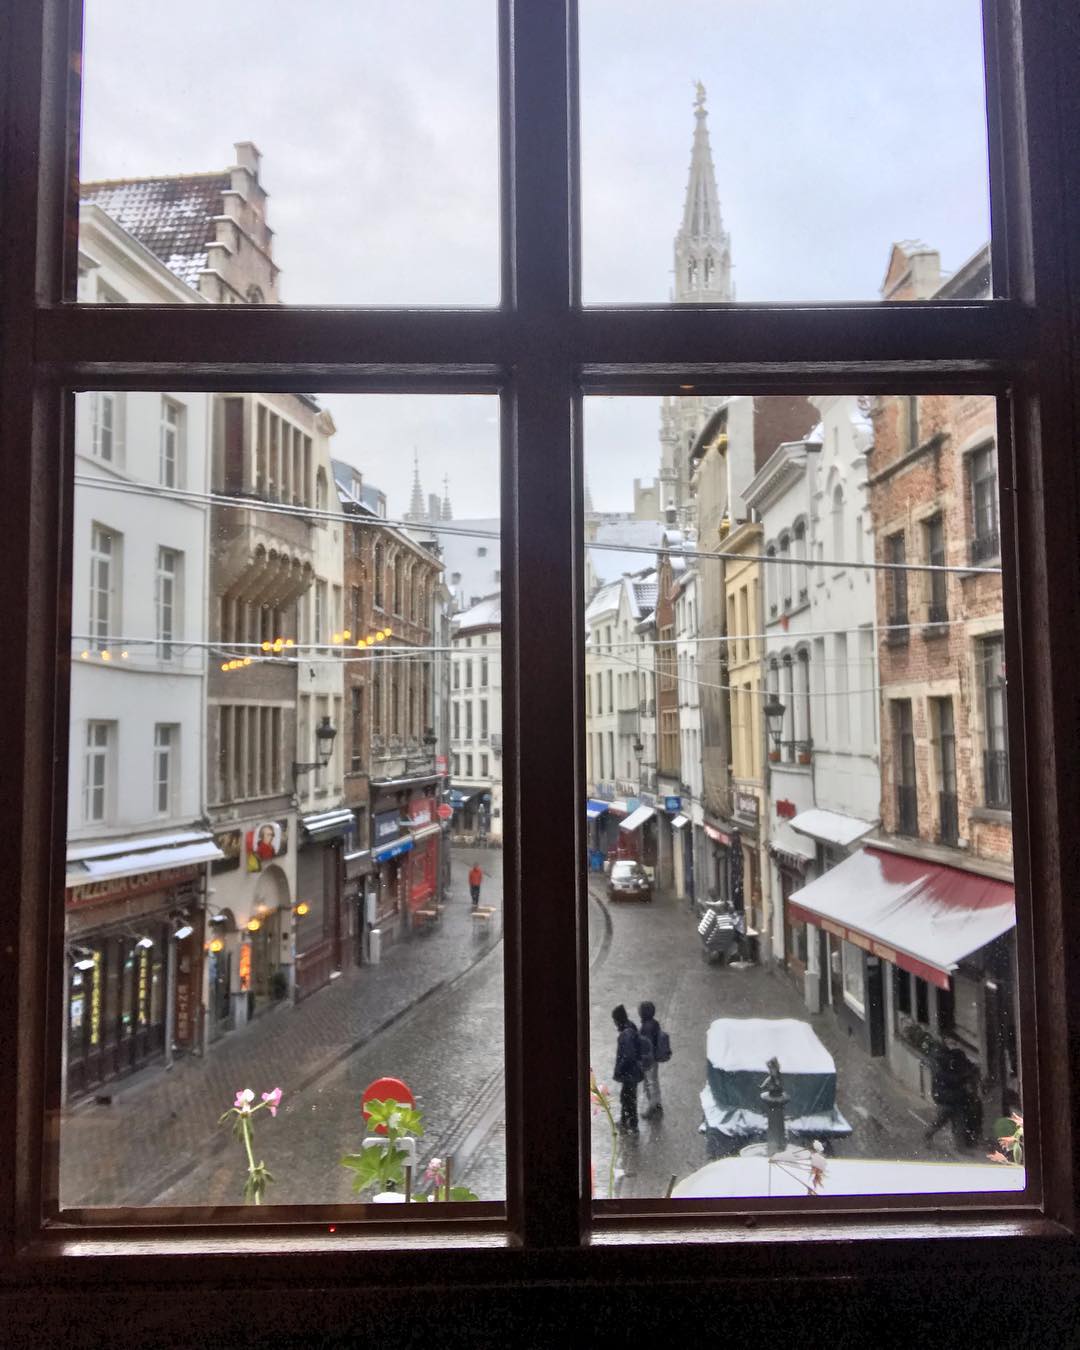 A quick visit to Brussel this week. What a cozy view to h...